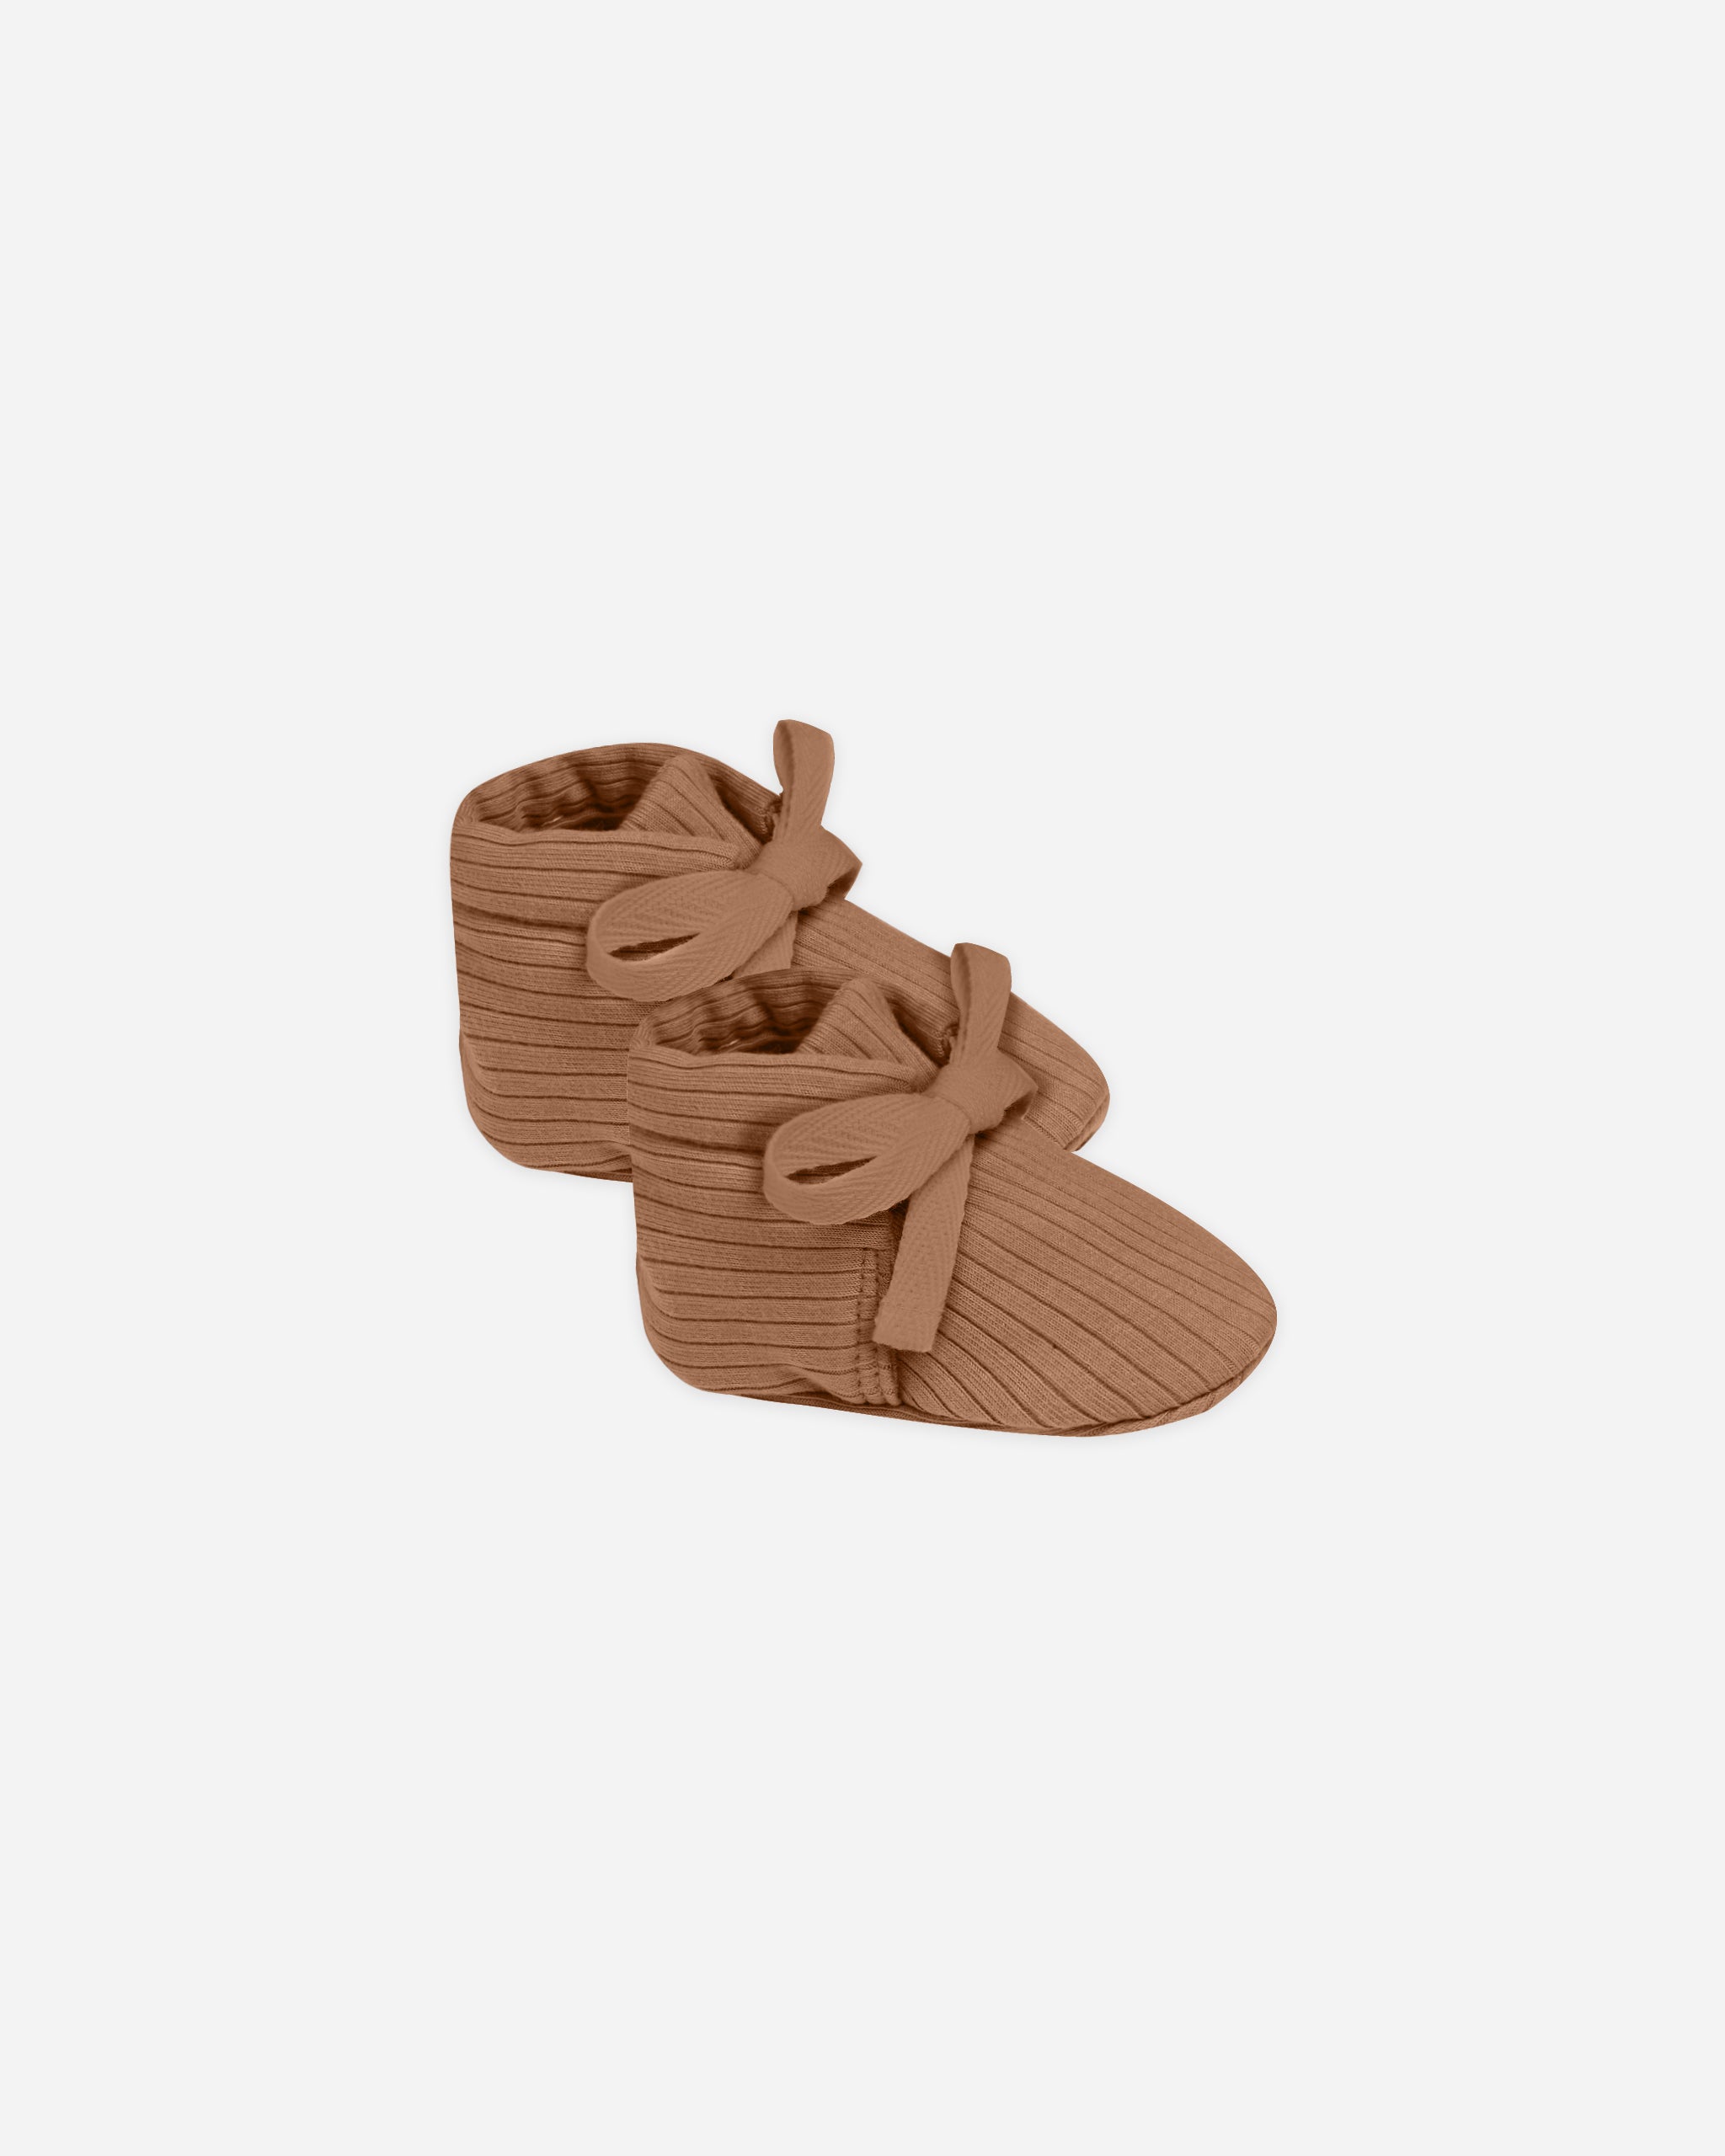 Ribbed Baby Booties || Cinnamon - Rylee + Cru | Kids Clothes | Trendy Baby Clothes | Modern Infant Outfits |